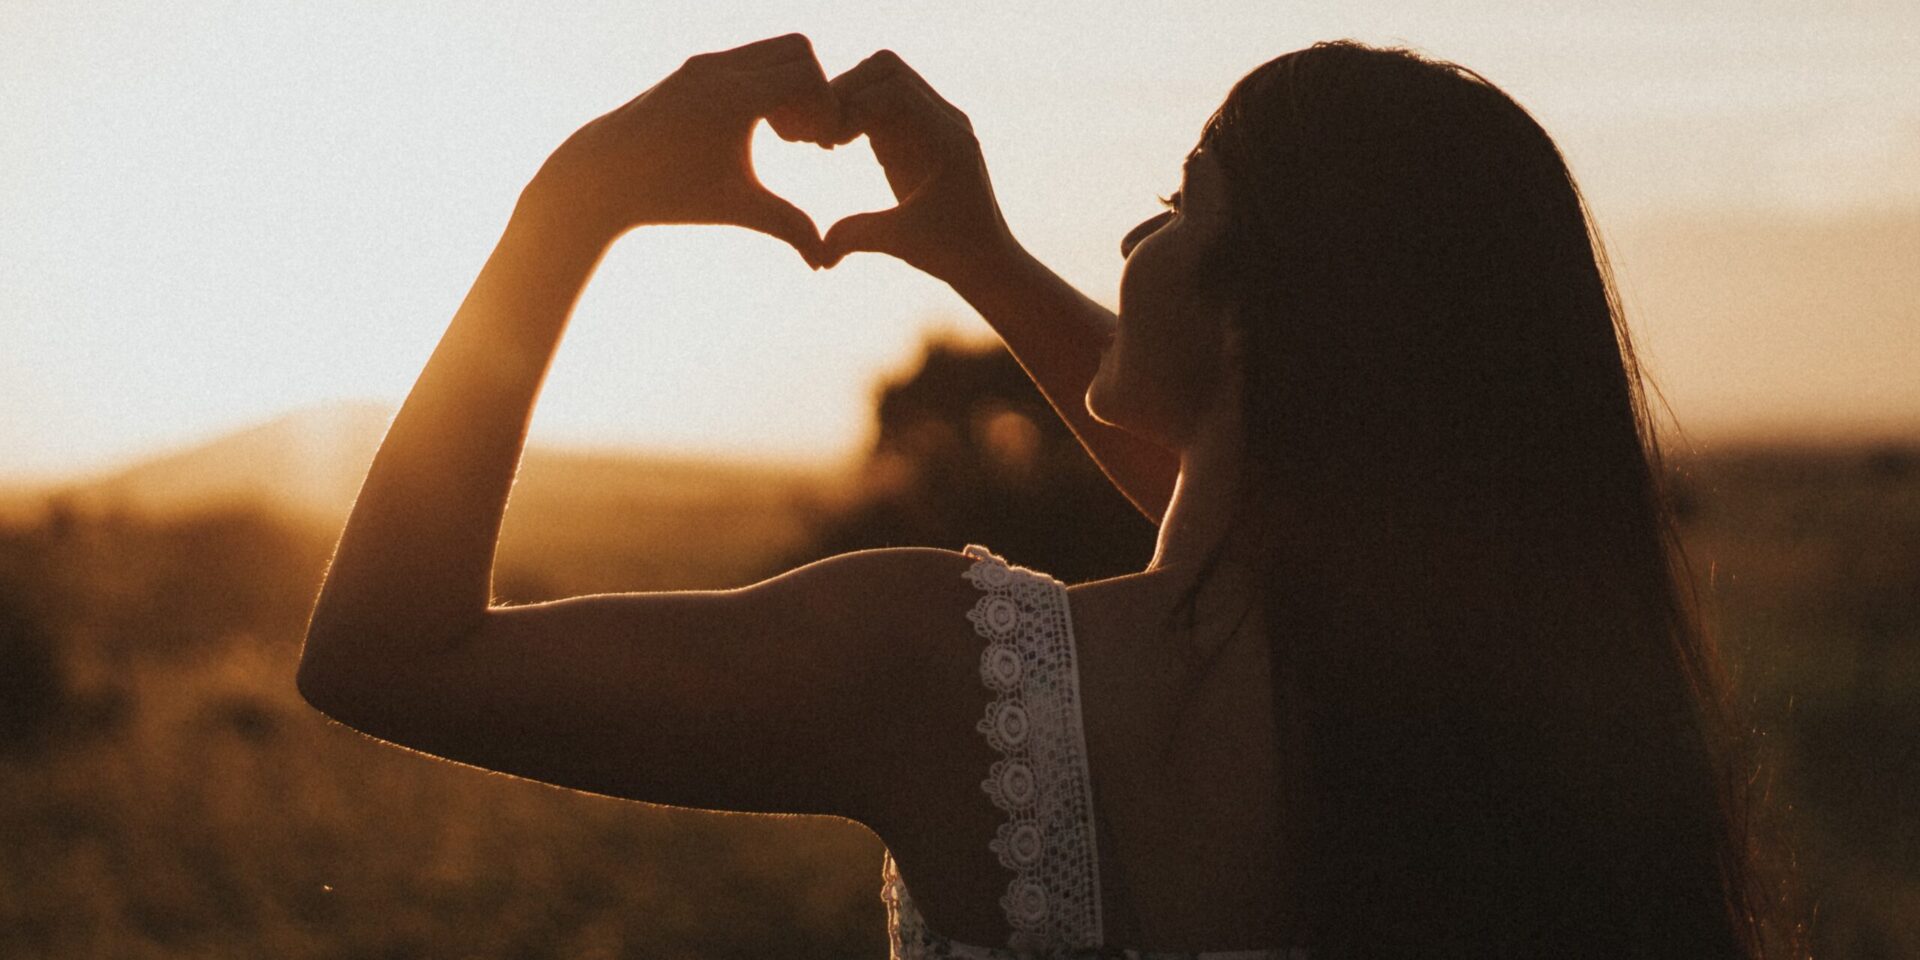 A woman holds her hands out in a heart shape against the setting sun. Contact an empath therapist in Los Angeles, CA for support with empath therapy in Los Angeles, CA. Search for “empath therapist near me” to learn more.